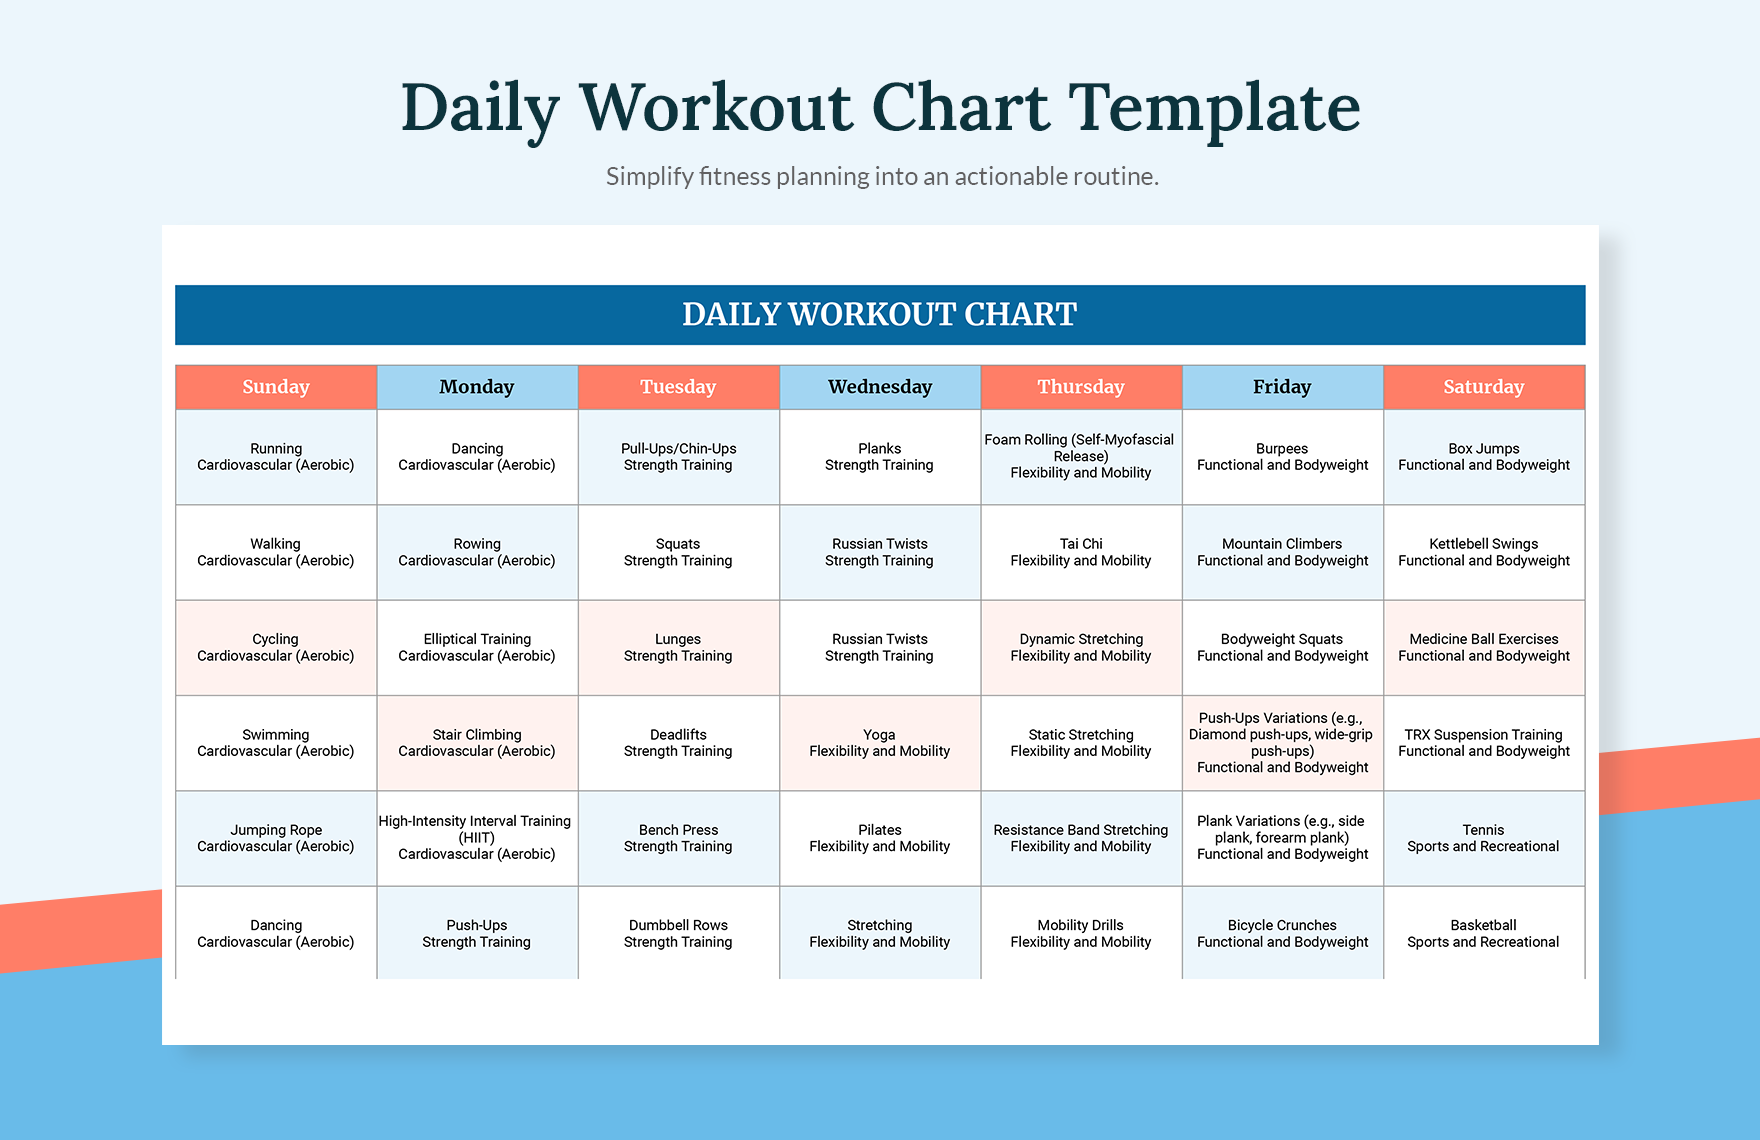 Daily Workout Chart Template In Excel